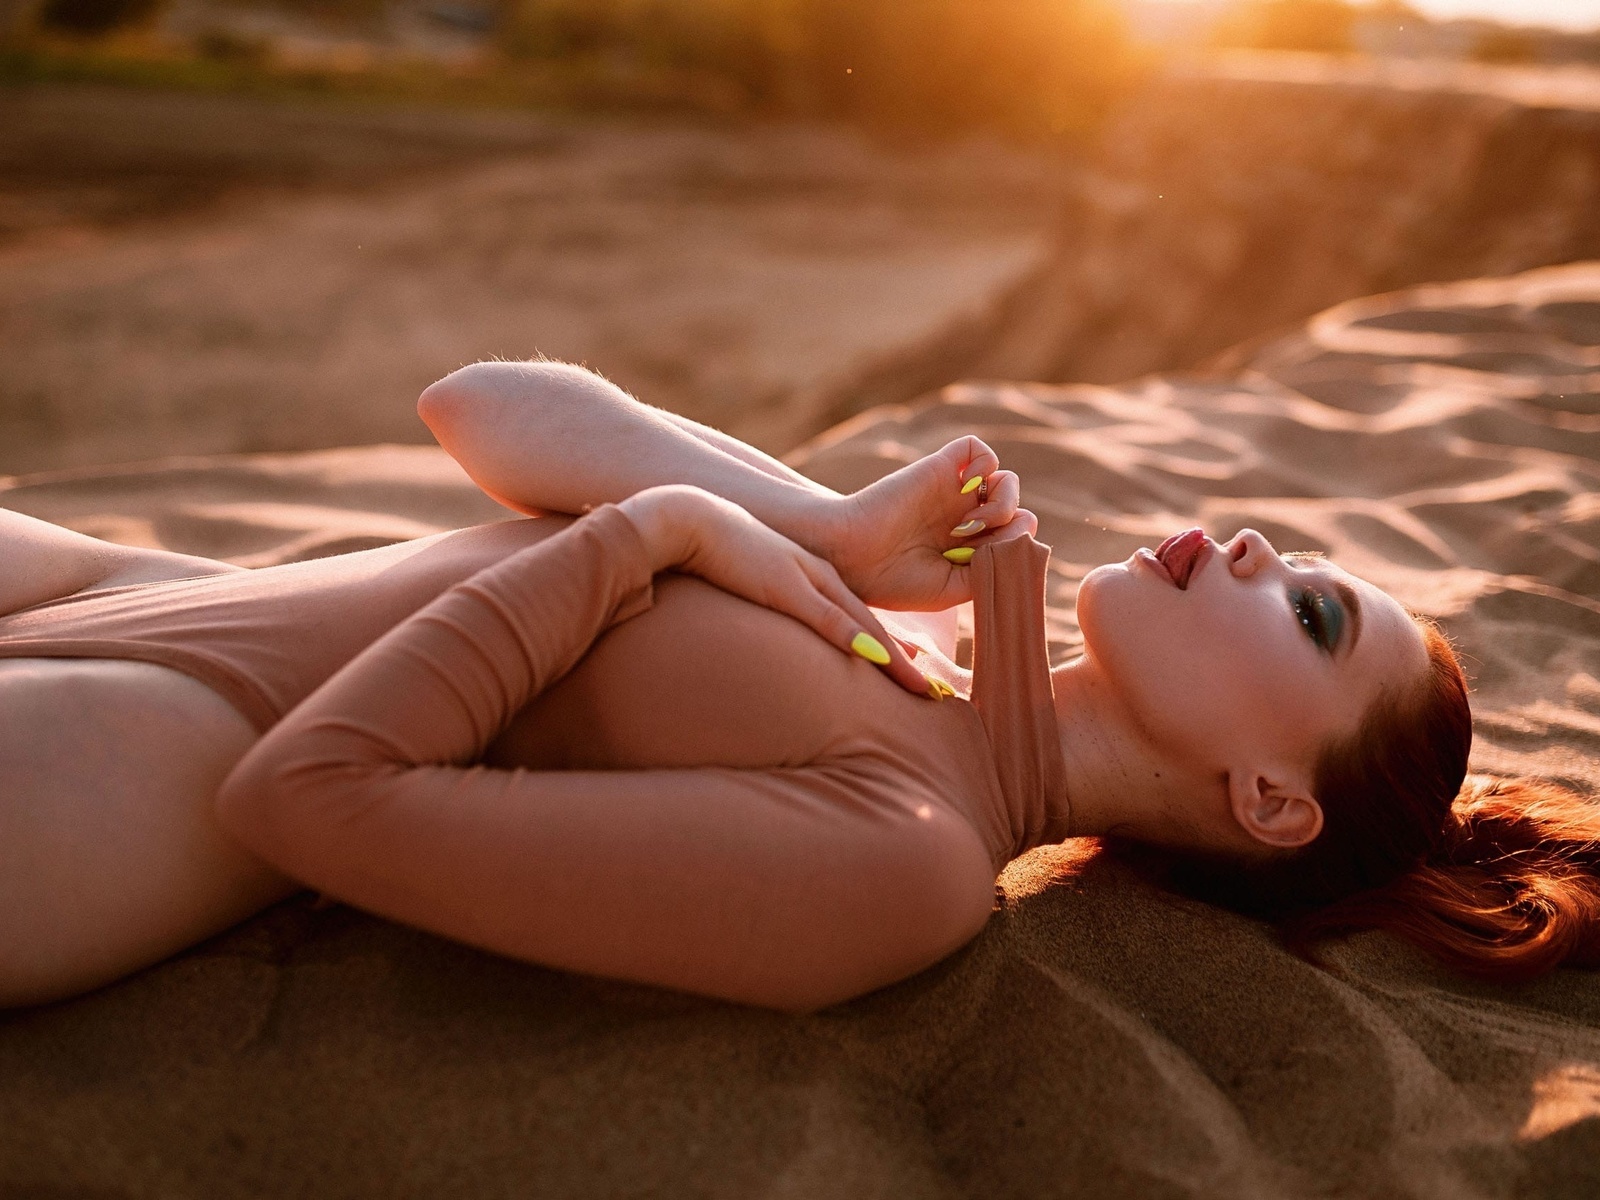 redhead, women, model, women outdoors, bodysuit, hips, tongue out, hips, sunset, closed eyes, sand